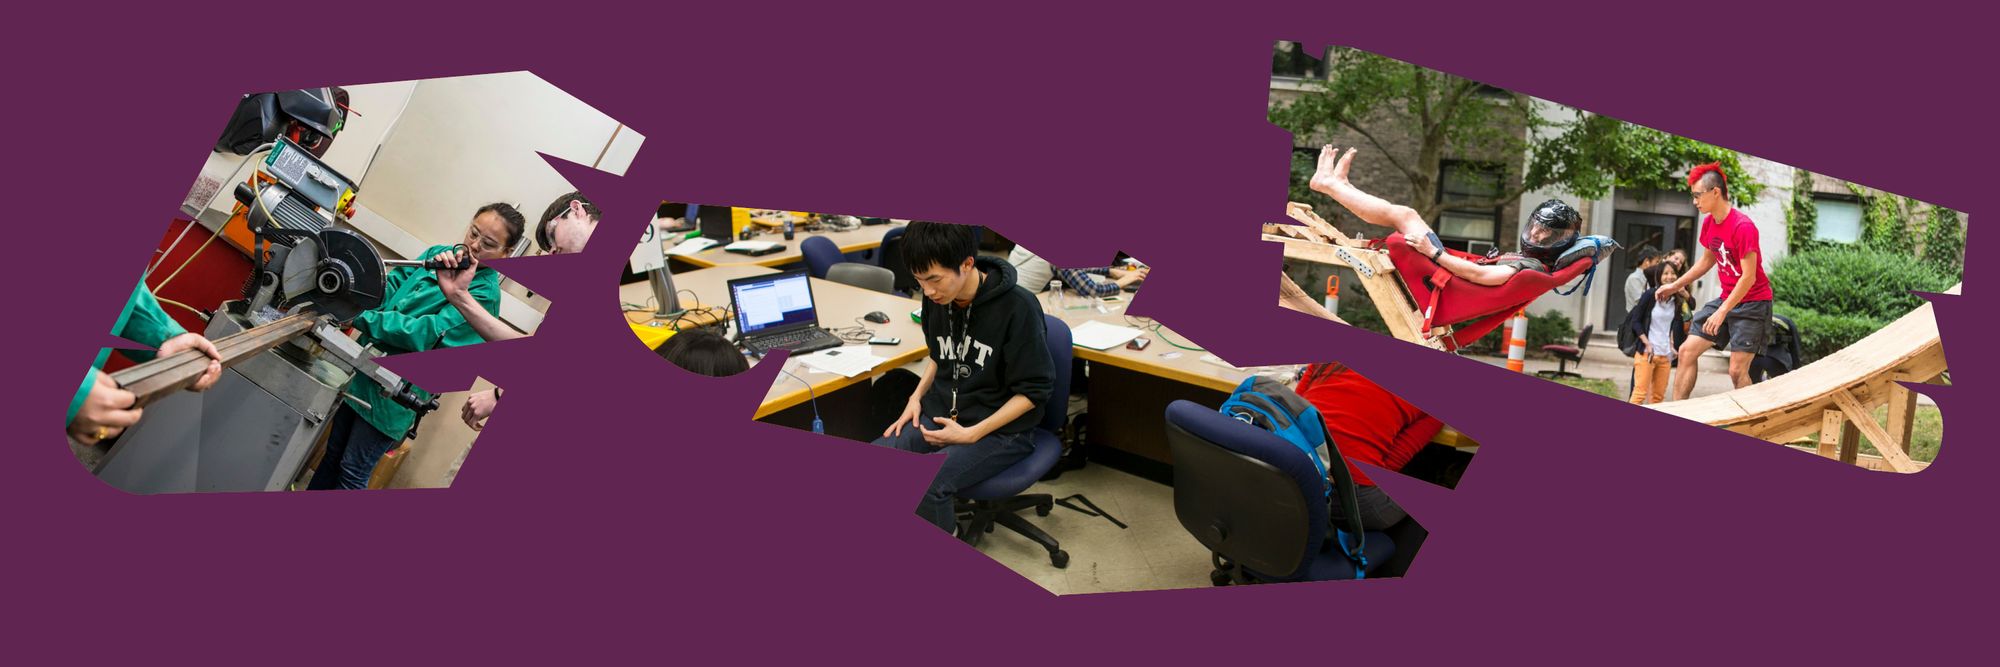 Red/Purple image with three different images inset and cropped to the outlines of the MIT MAD logo. The first image shows two students working in a workshop using a band saw to cut metal. The middle image shows a student taking a break from working at their computer. The final image shows two students outside in a make-shift rollercoaster wearing red. One student is in a car-seat wearing a motorcycle helmet with their feet up in the air, sliding along the rollercoaster track. the other is standing on the side waiting to aid them.